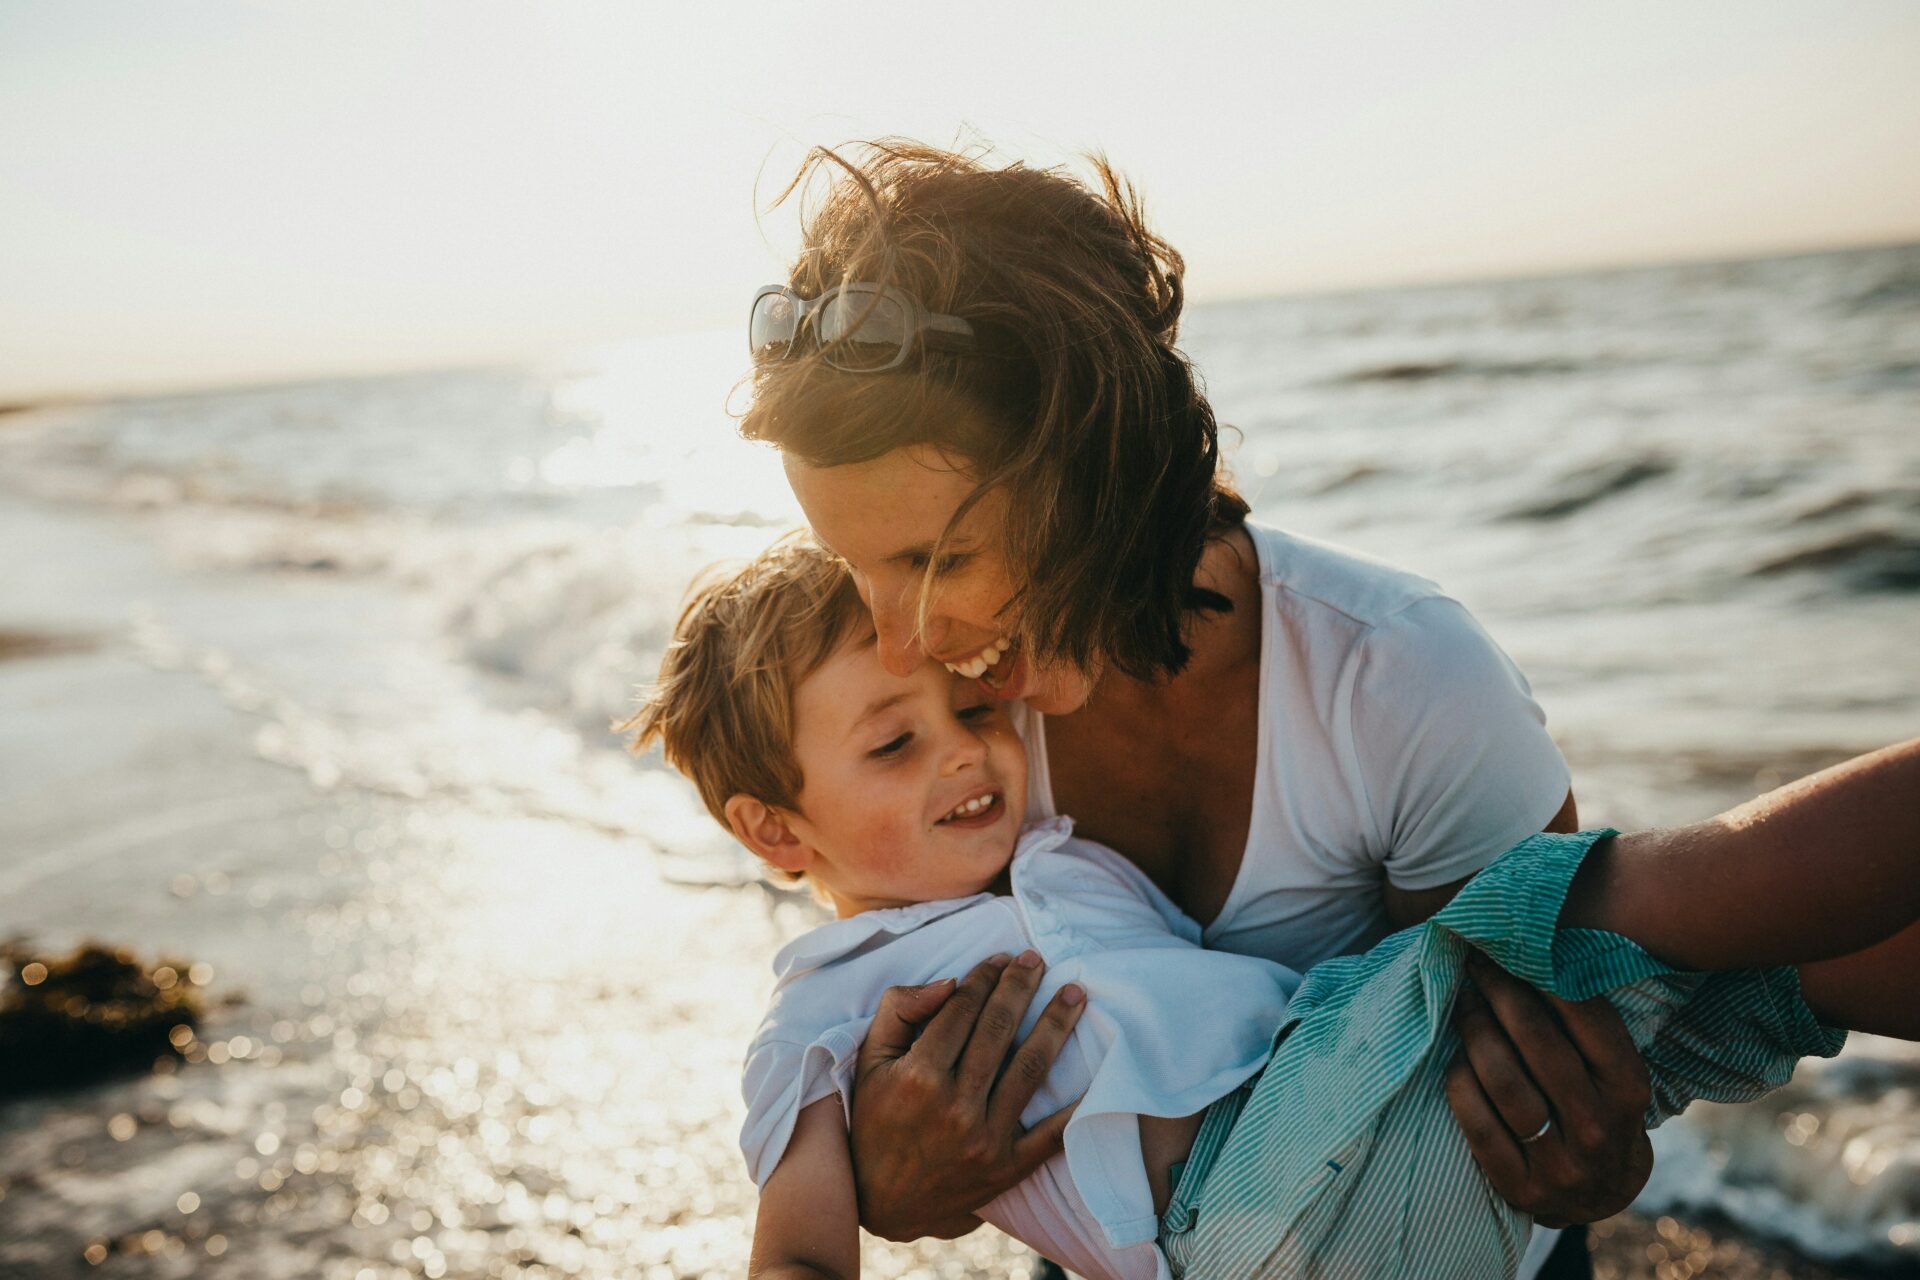 A mother and child are enjoying a sunny day on the beach, playing in the sand with the ocean in the background. This image represents the concept of life insurance in a trust, emphasizing the protection and security it offers for loved ones' future financial well-being.